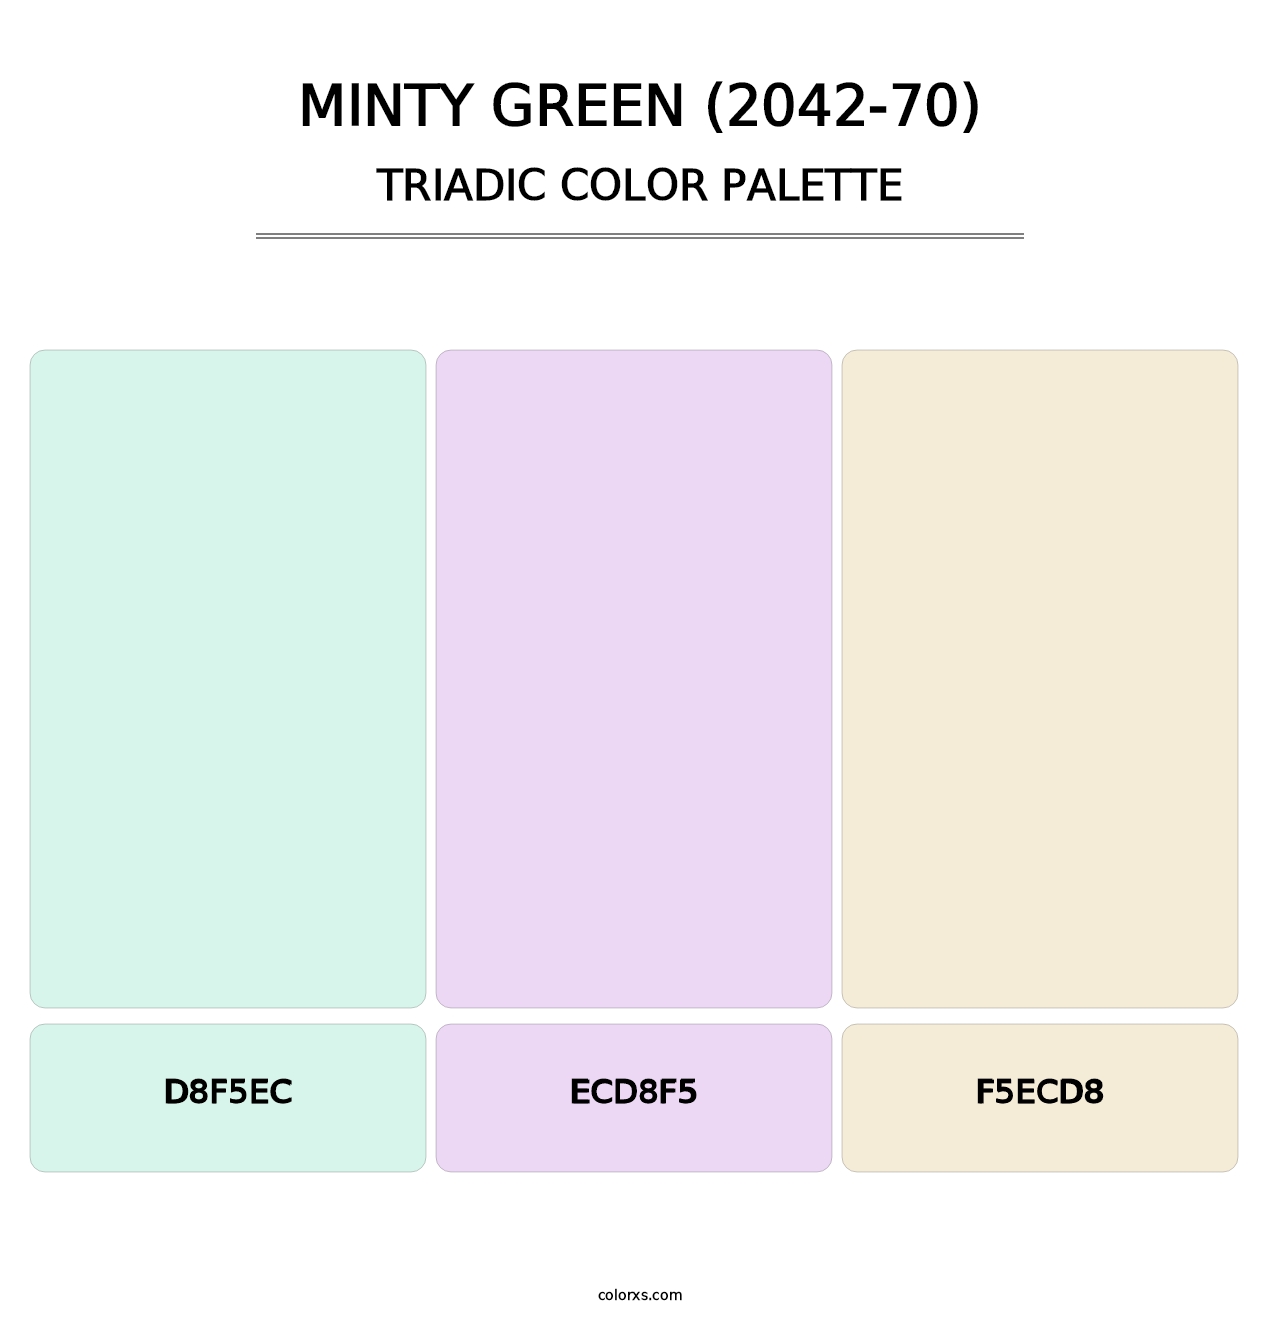 Minty Green (2042-70) - Triadic Color Palette